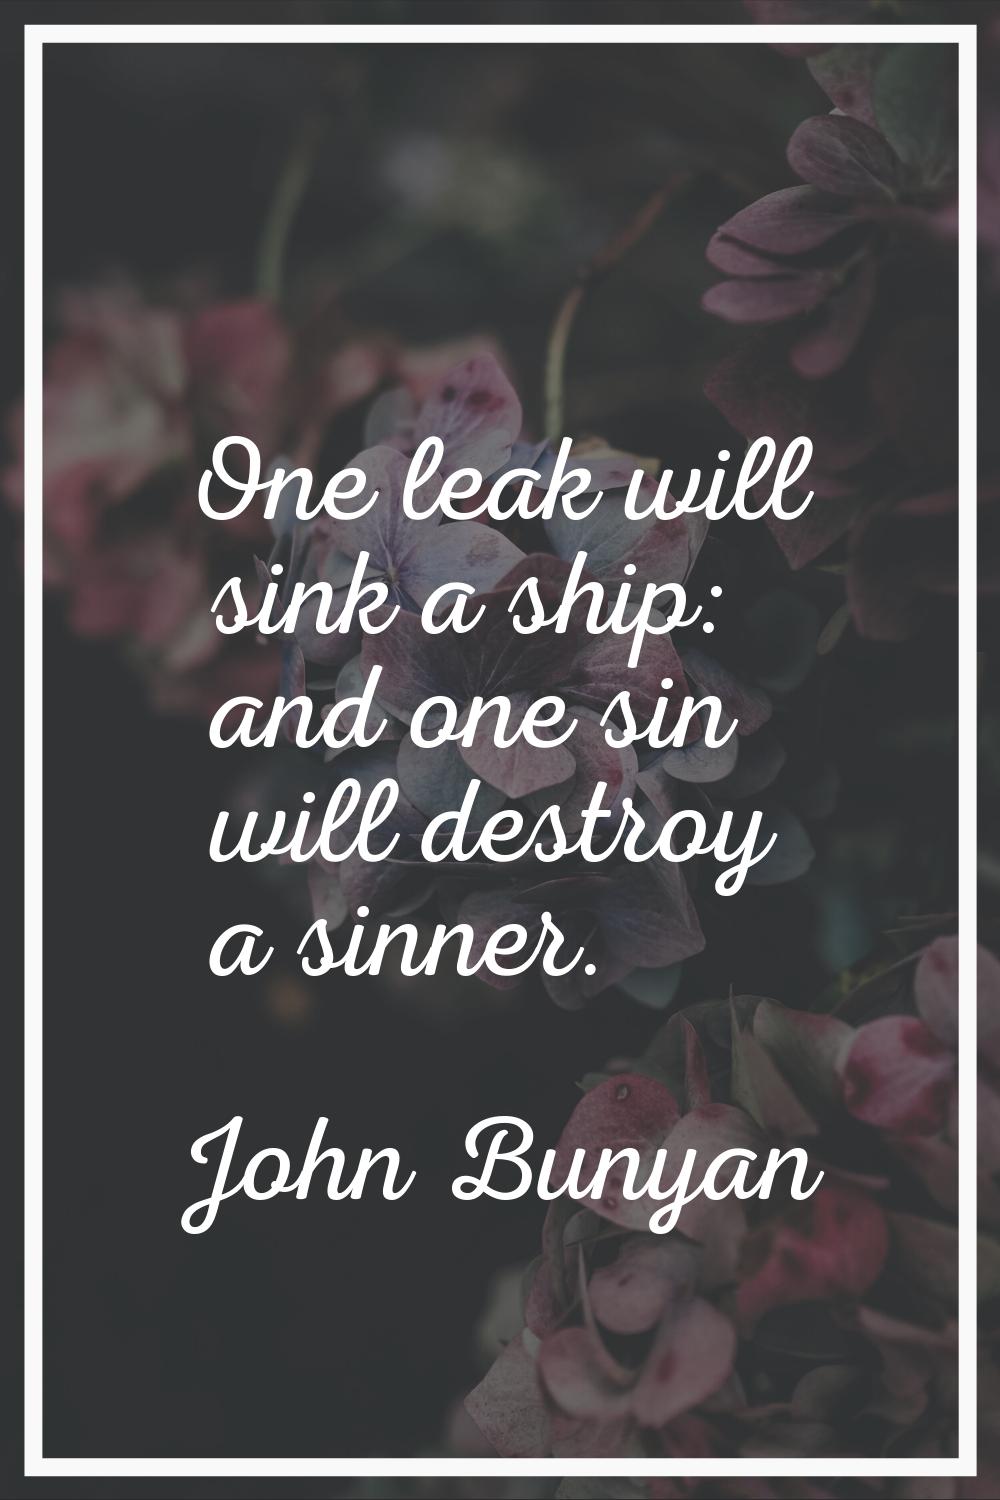 One leak will sink a ship: and one sin will destroy a sinner.